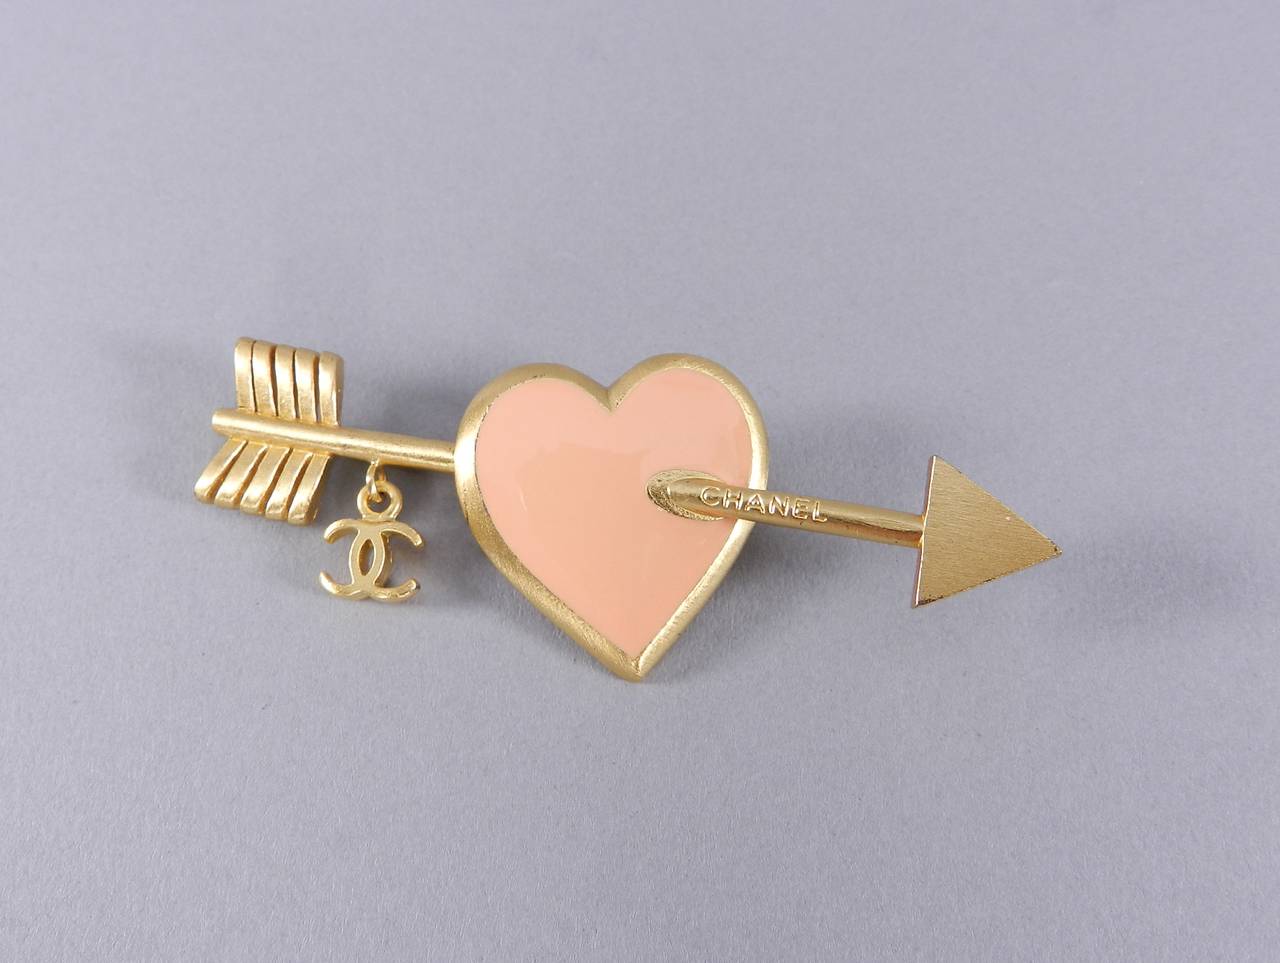 Chanel 2002 spring pink enamel heart and arrow brooch. Matte brushed goldtone metal with dangling cc charm. Excellent condition. With box. Measures 2.75 x 1 1/8